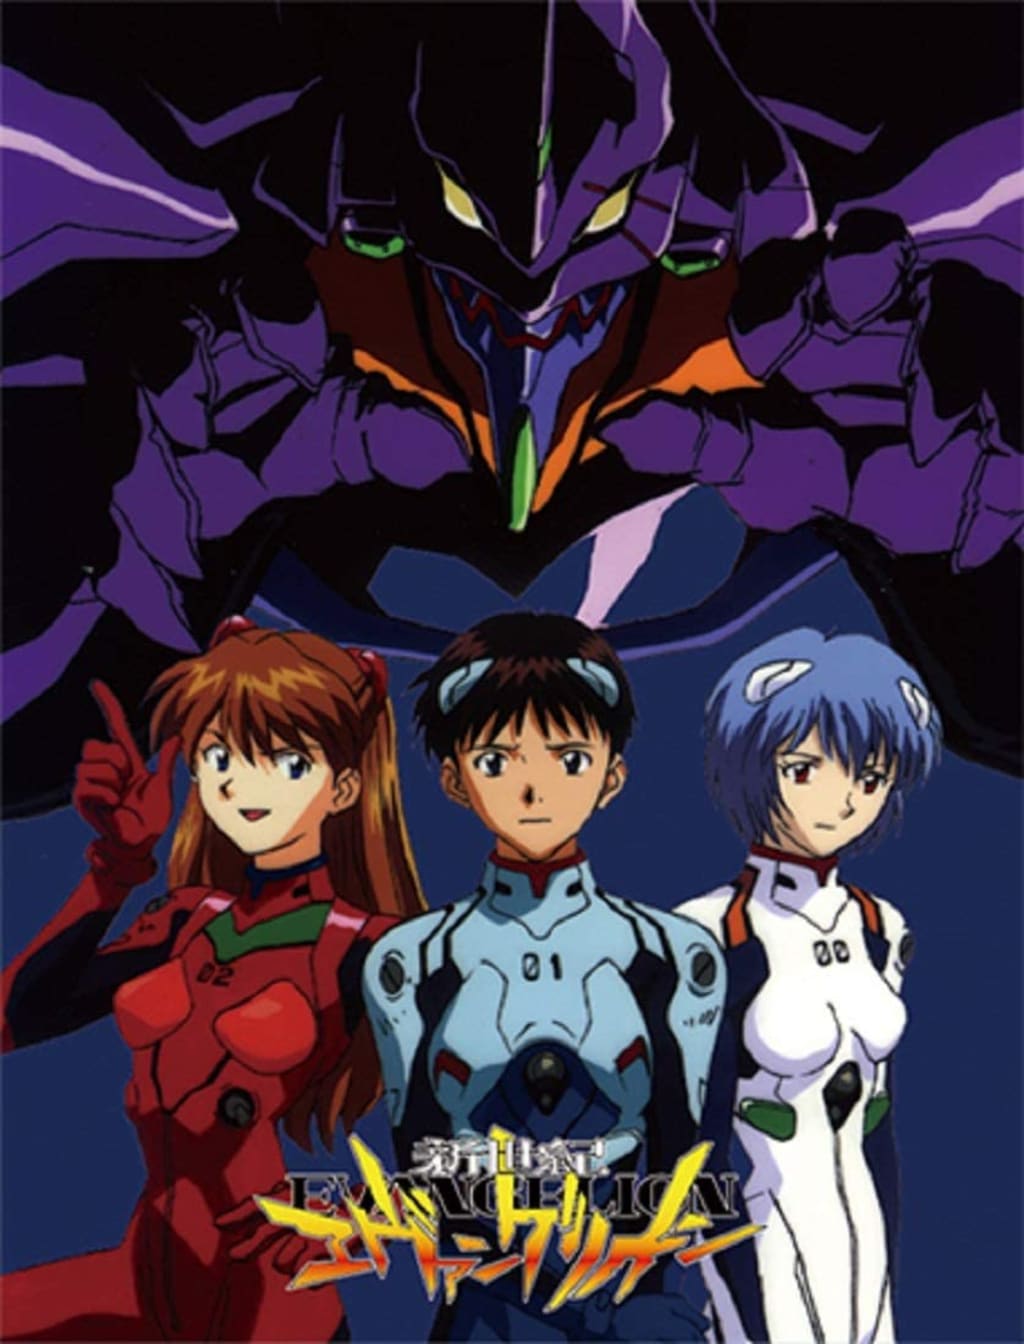 The Best Version of Evangelion's Story Isn't Animated